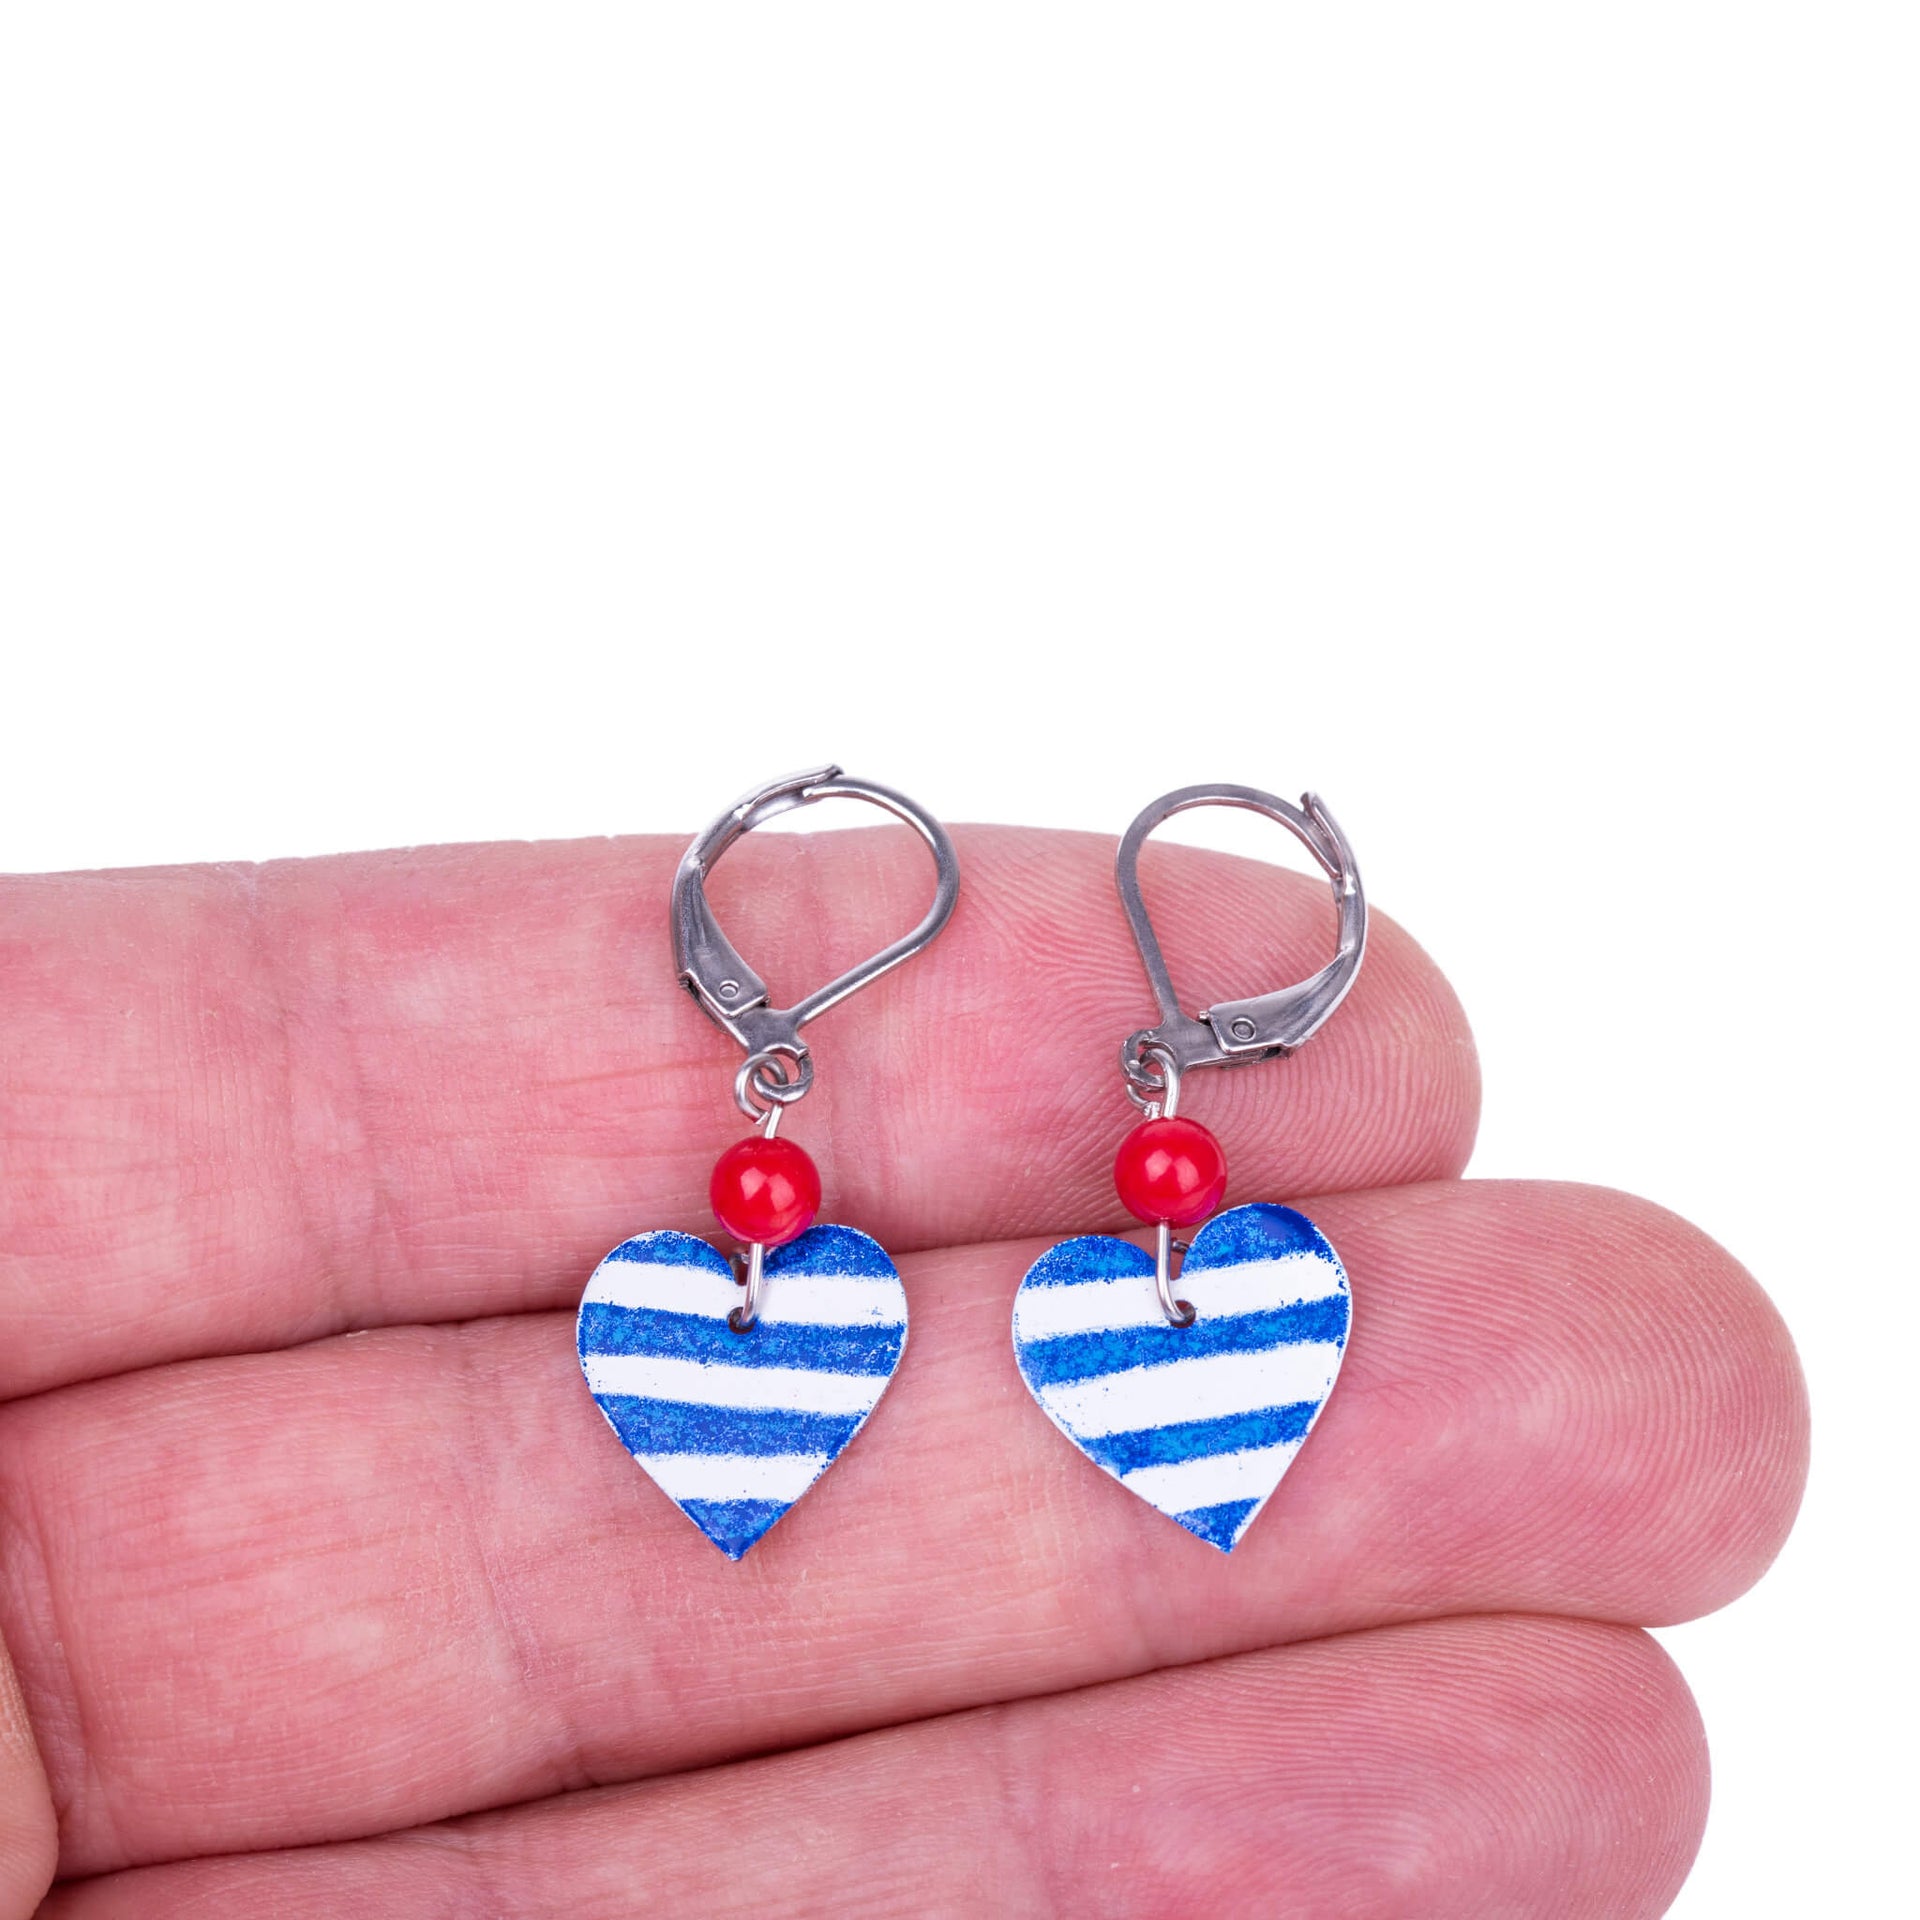 handmade heart earrings with blue stripes and red coral beads show on fingers